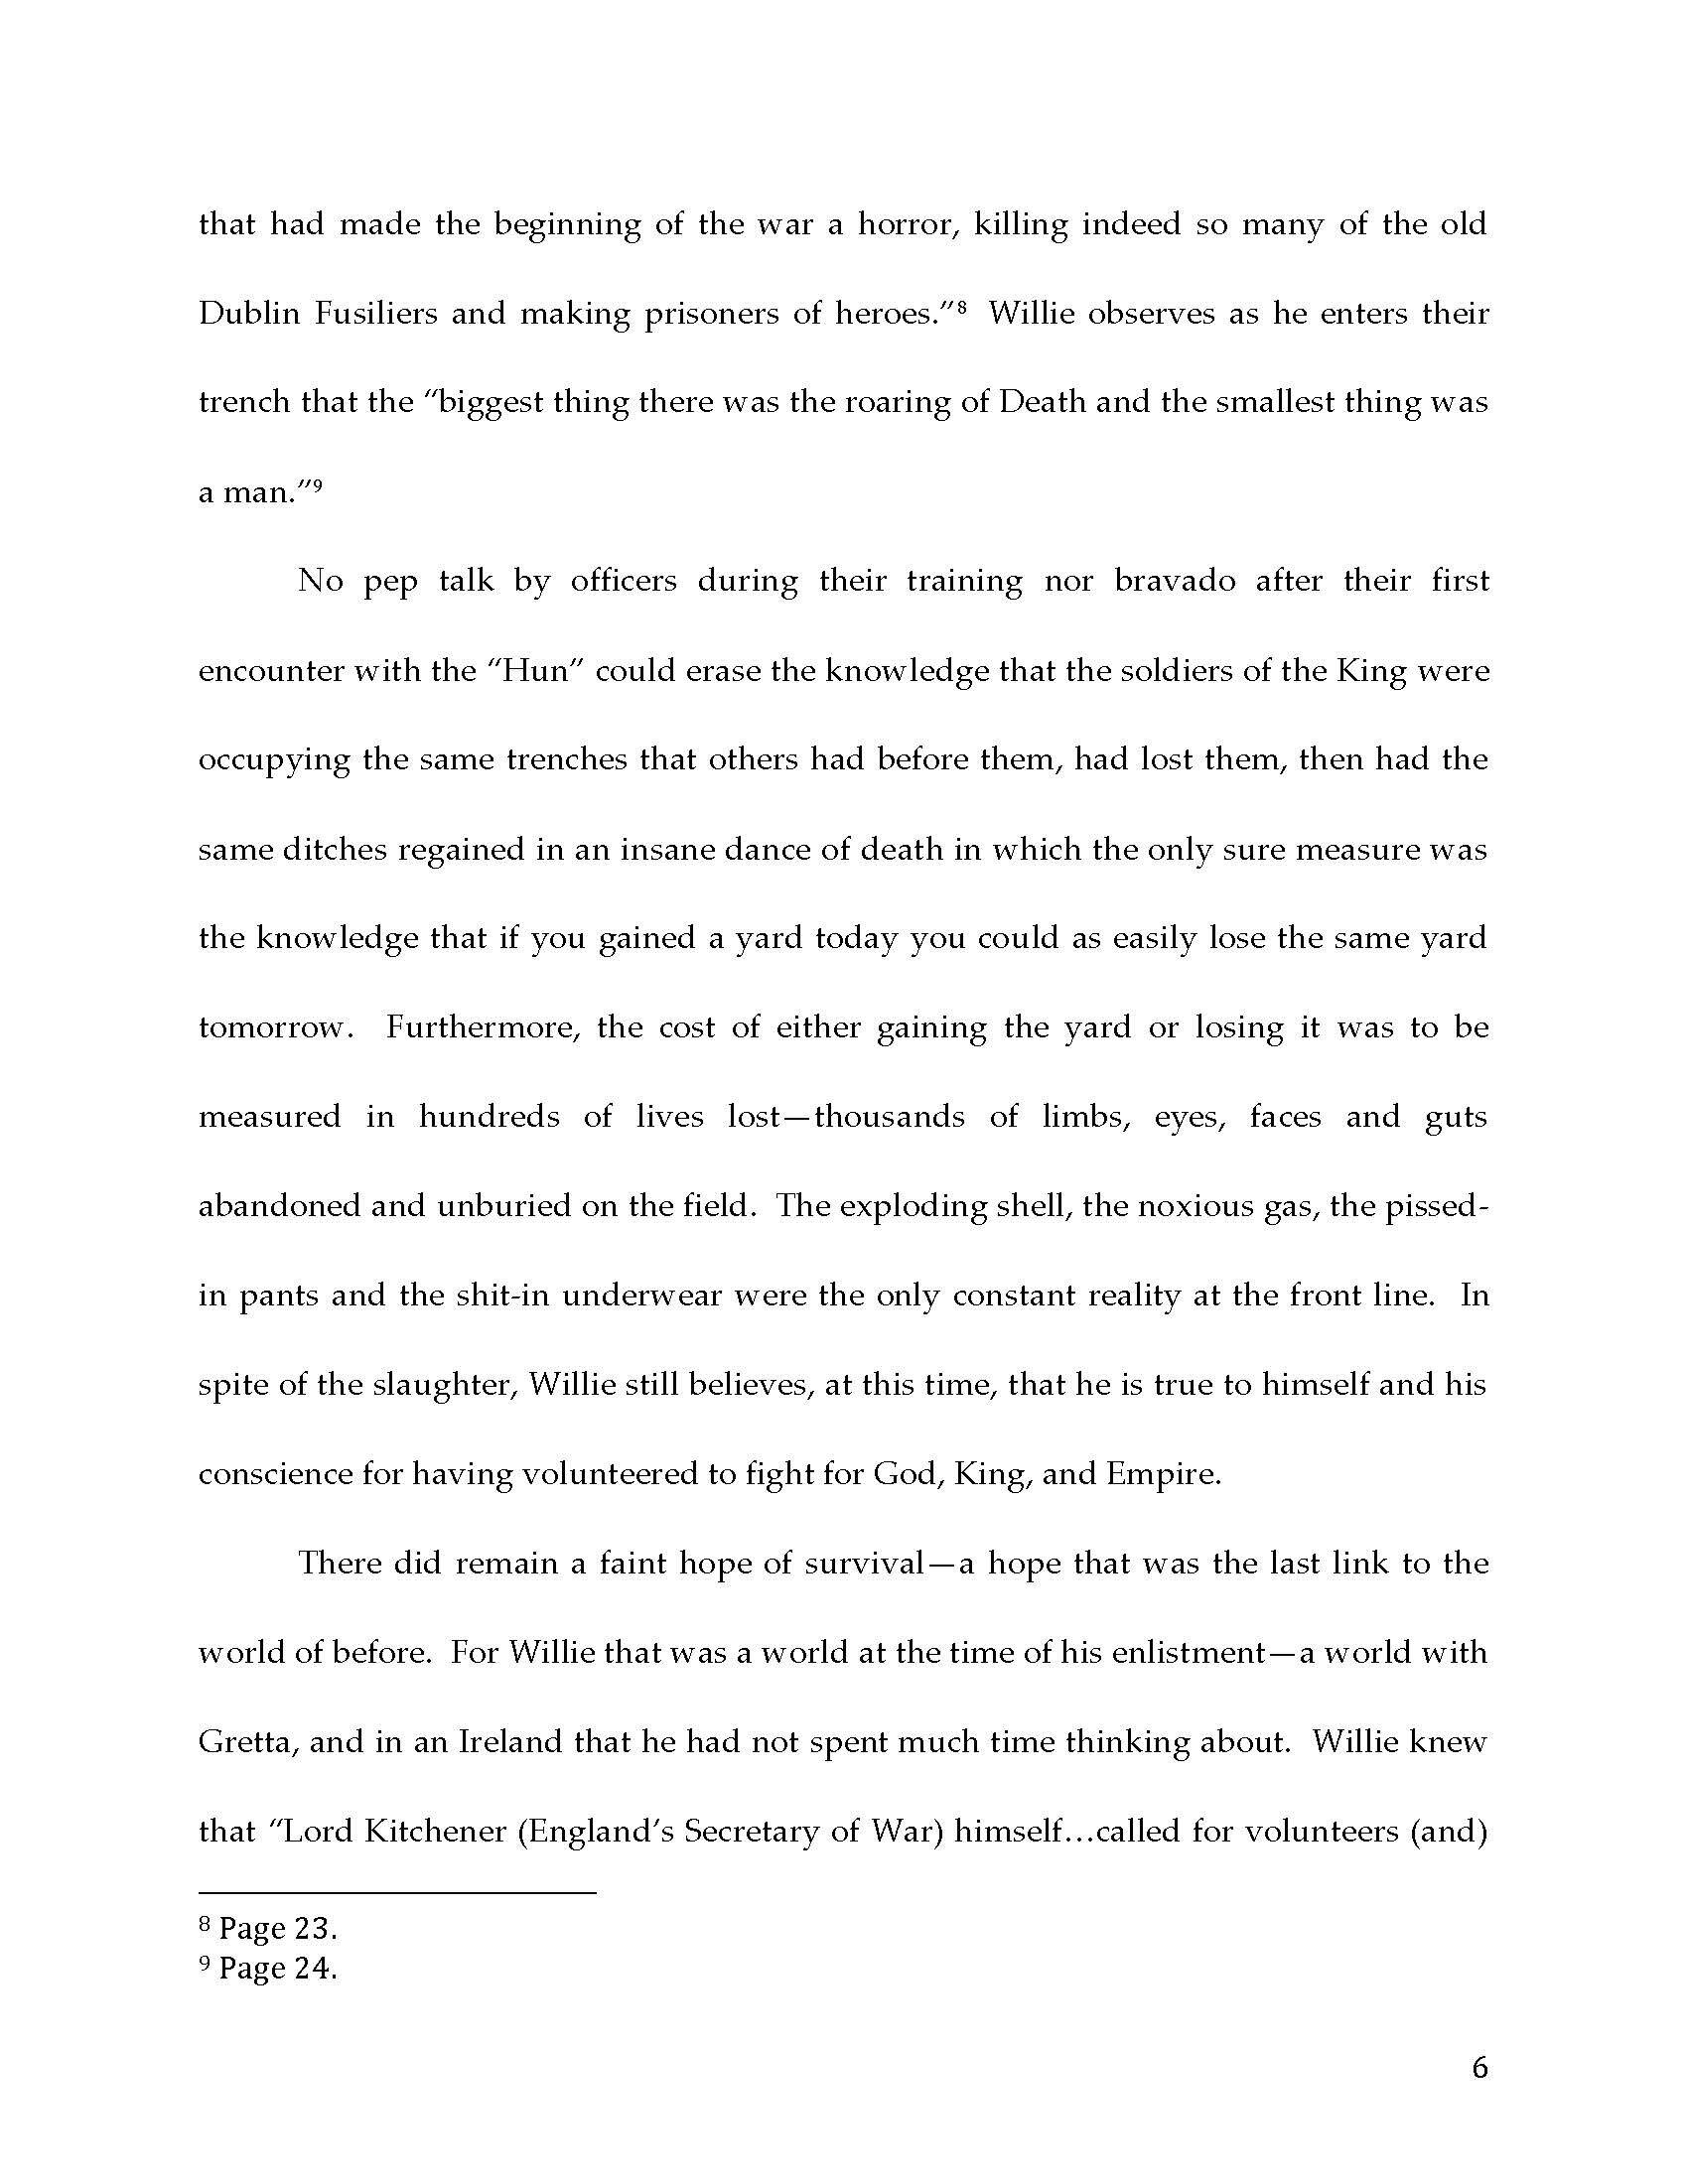 Becoming William Dunne_Paper_NAOMS_Page_06.jpg